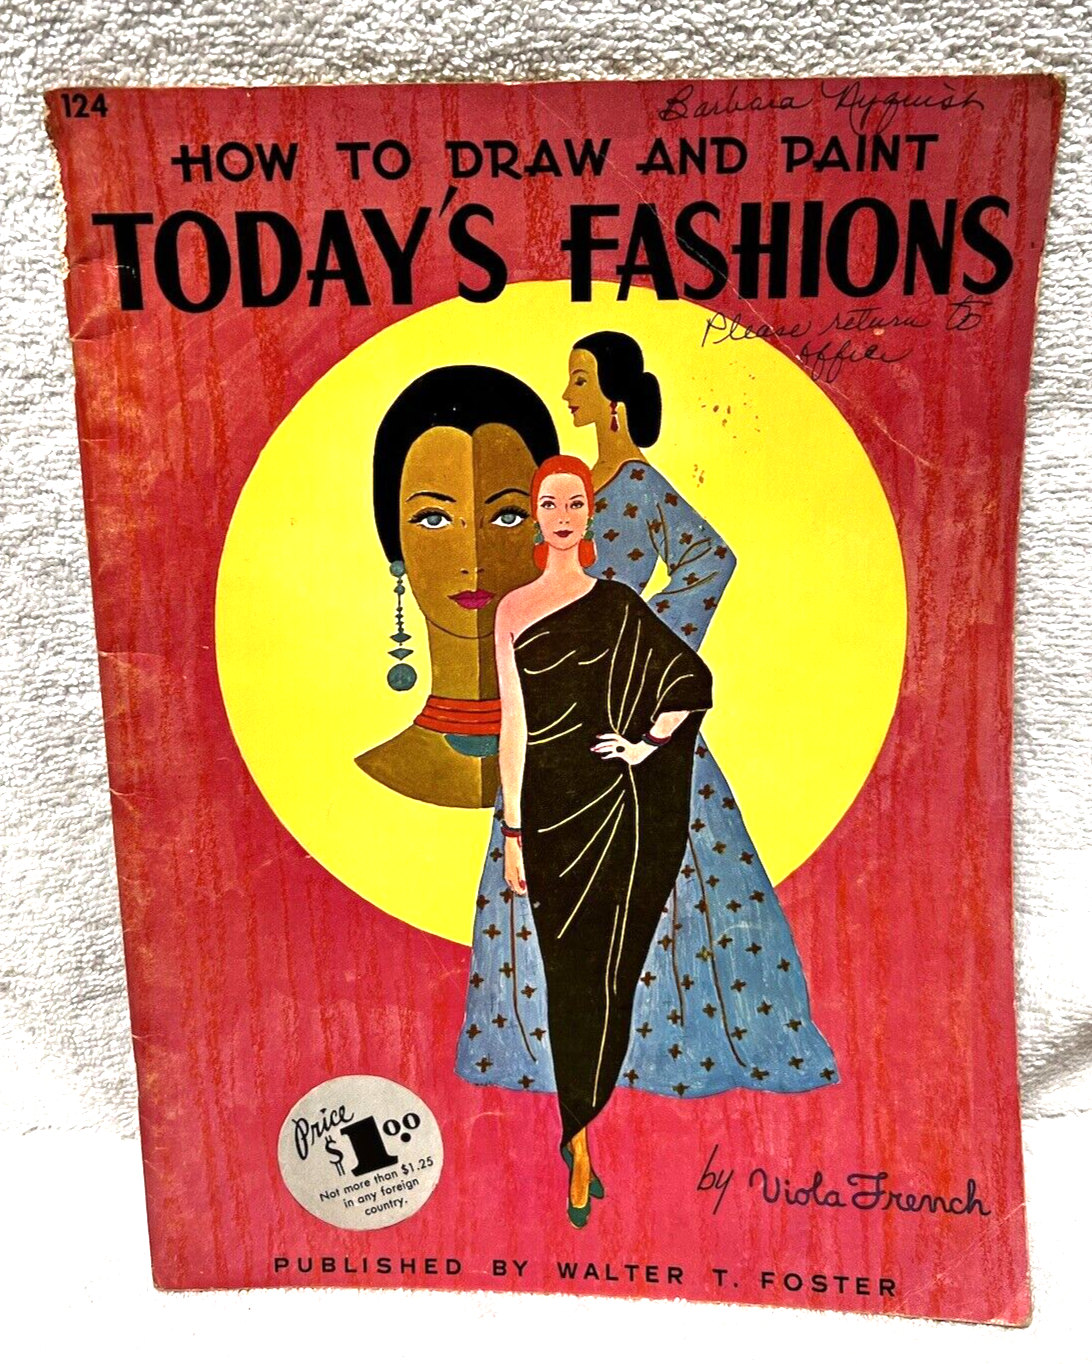 Walter T Foster How to Draw Paint Today’s Fashion by Viola French #124 - $4.95